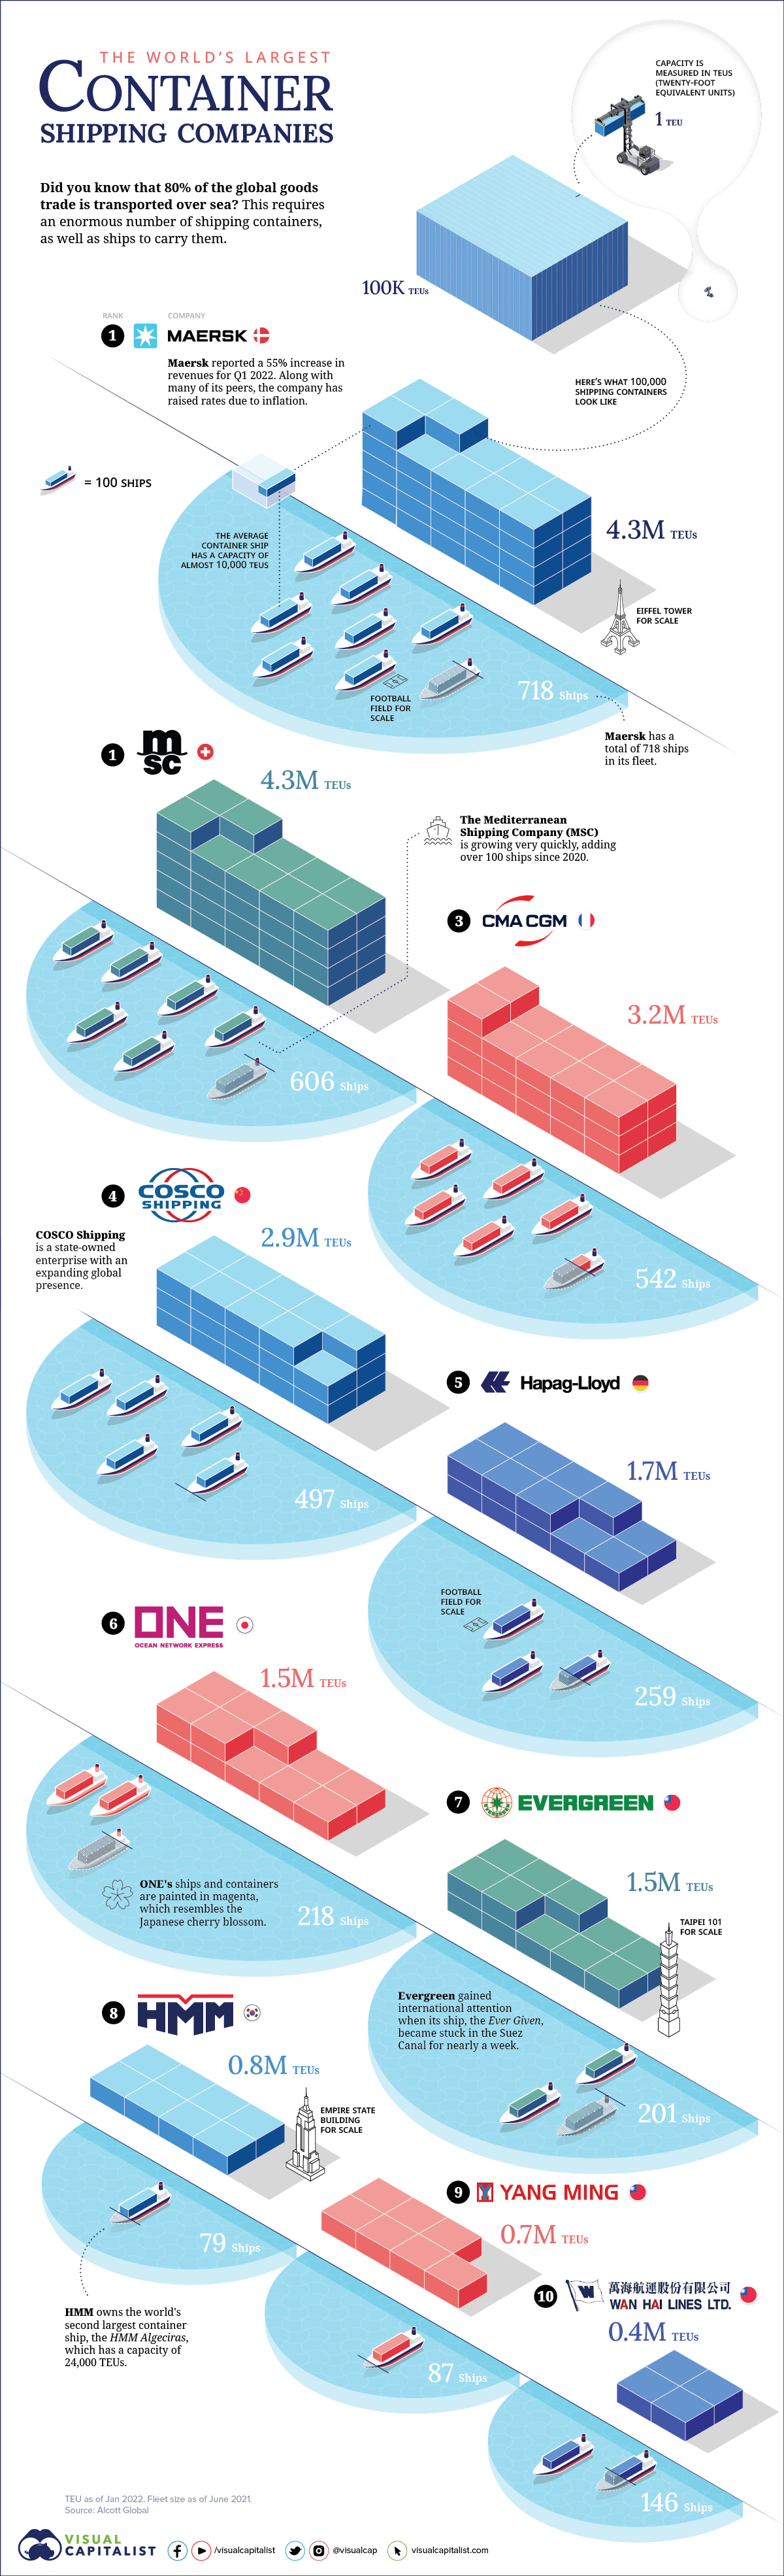 Ranked The Worlds Largest Container Shipping Companies Fortitude